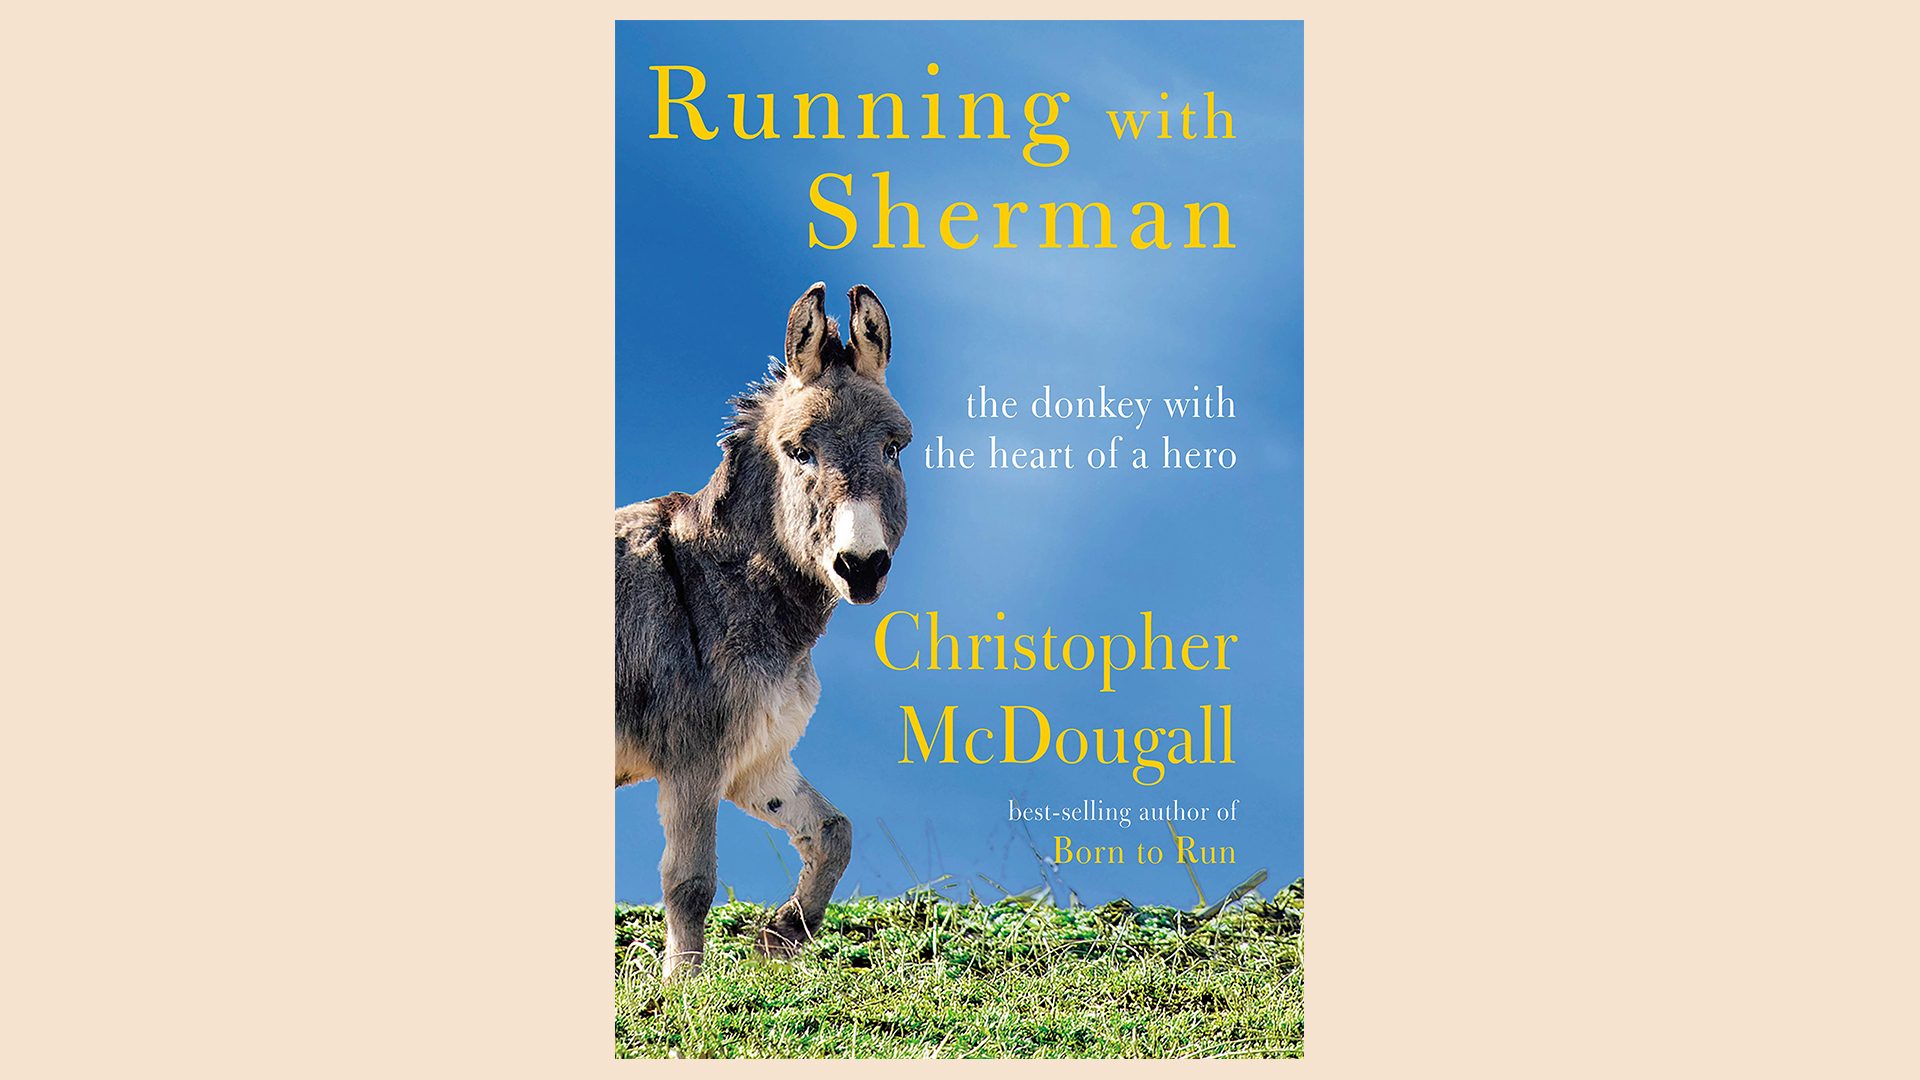 Running with Sherman by Christopher McDougall